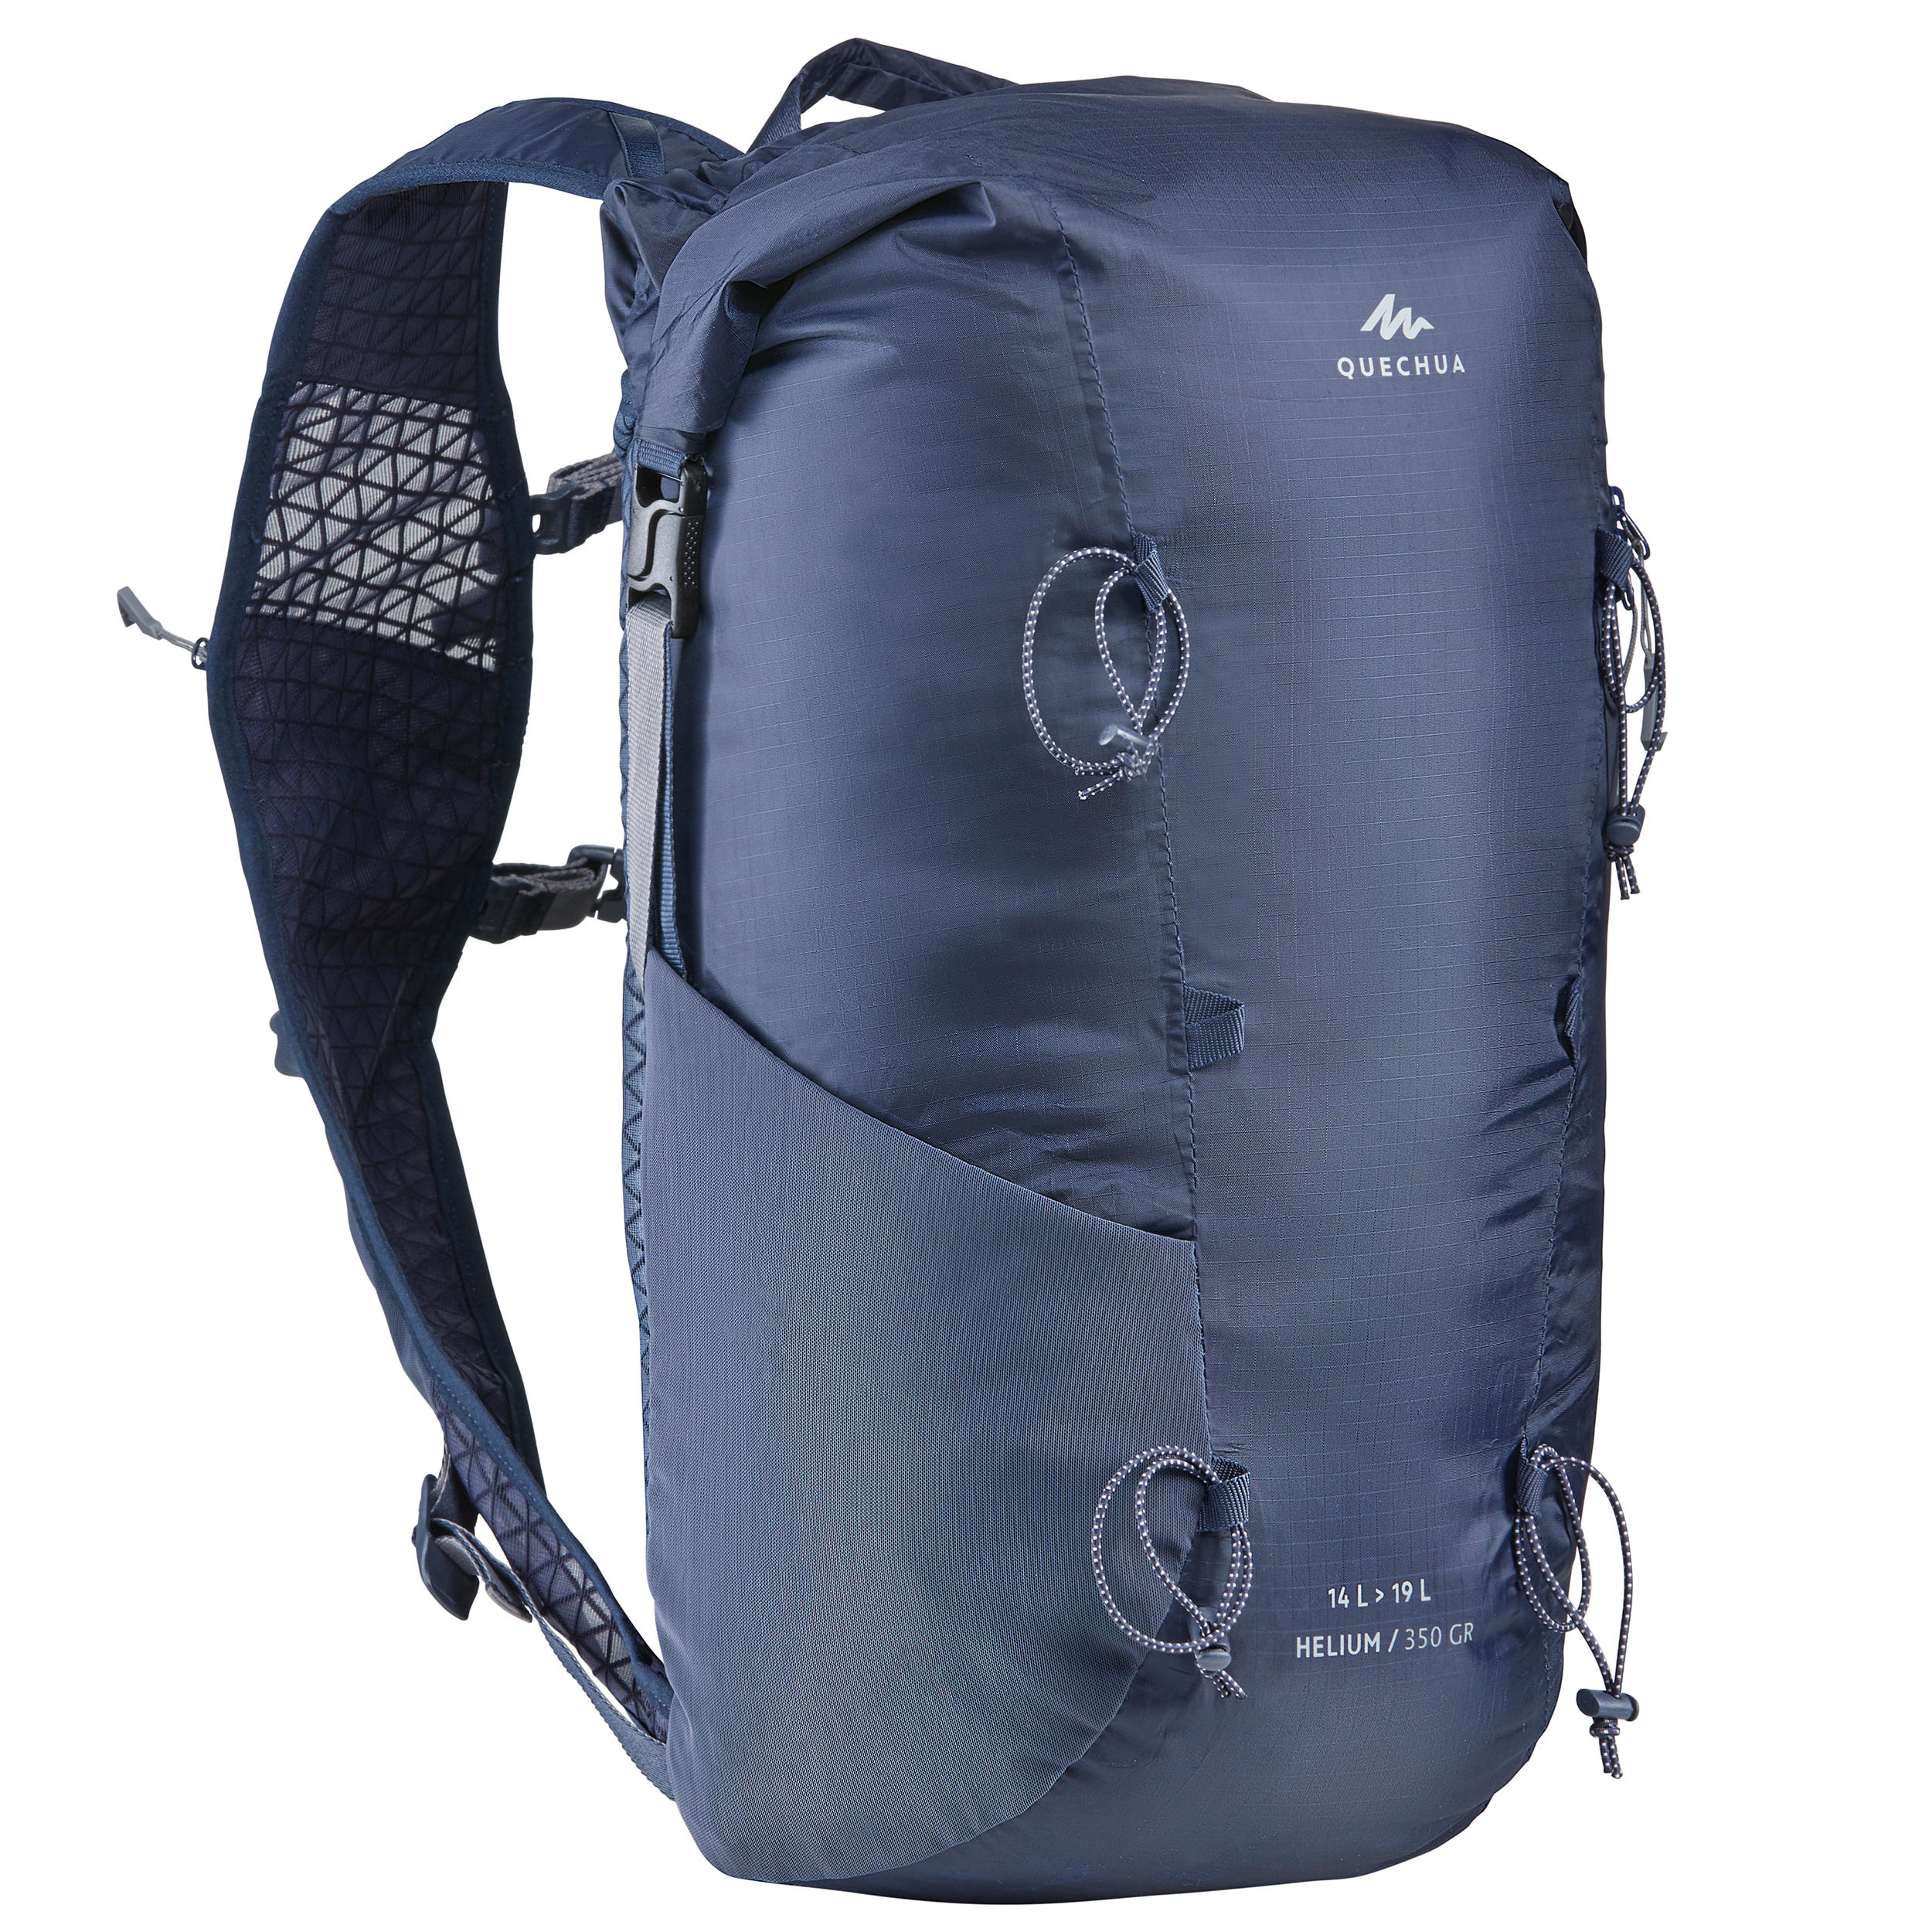 Fast Hiking Backpack FH900 14 - 19 